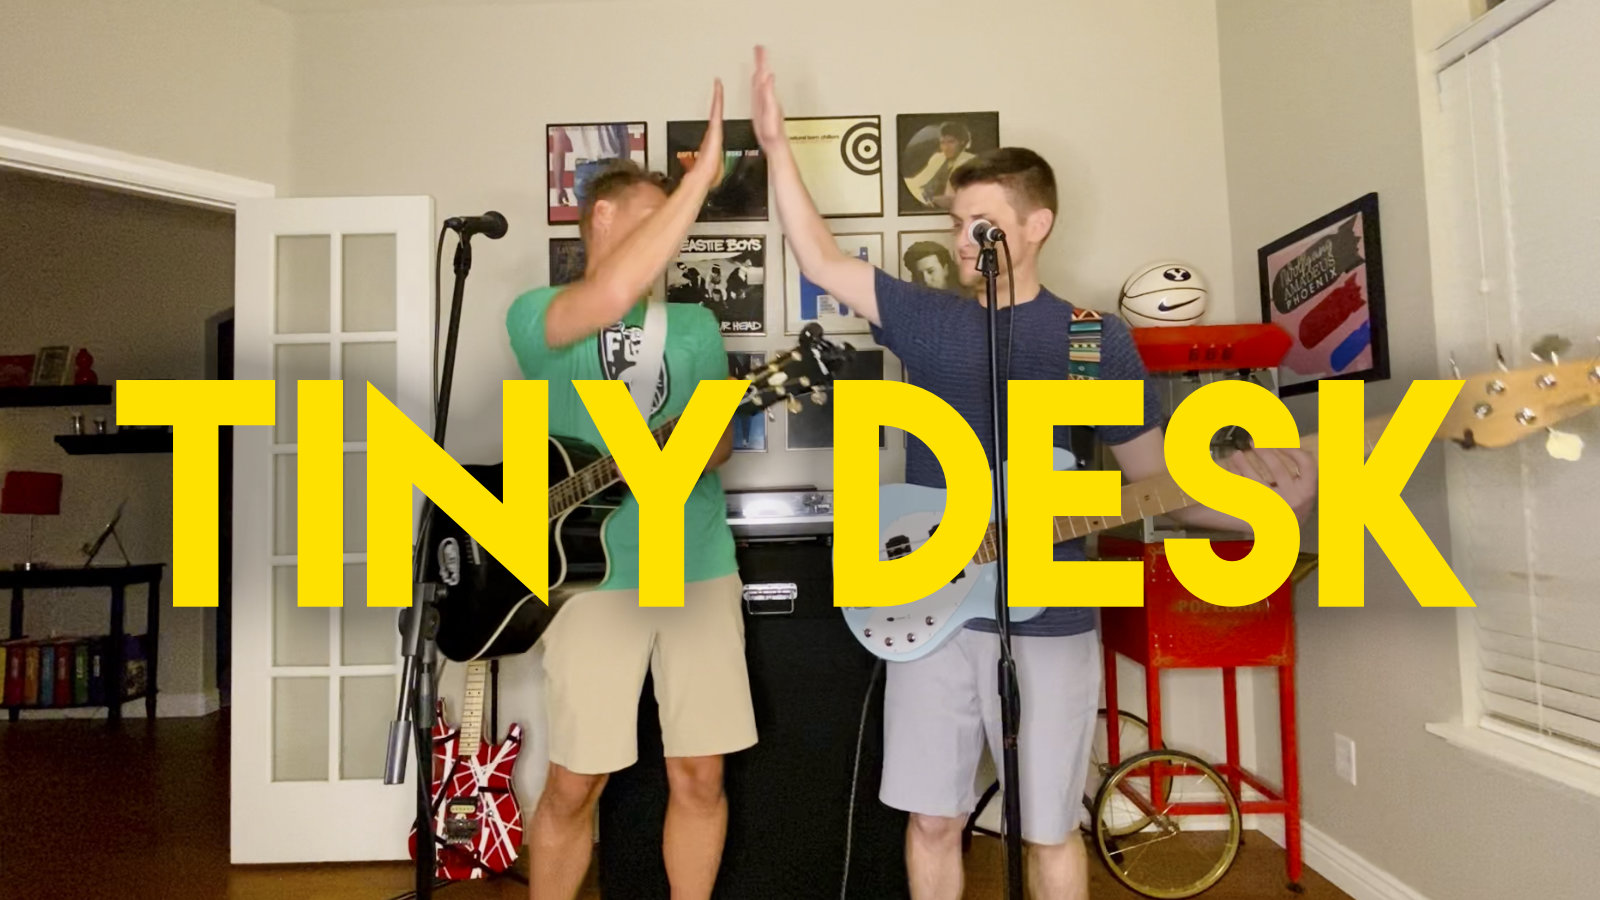 Here’s my application to the Tiny Desk Contest Blake Snow